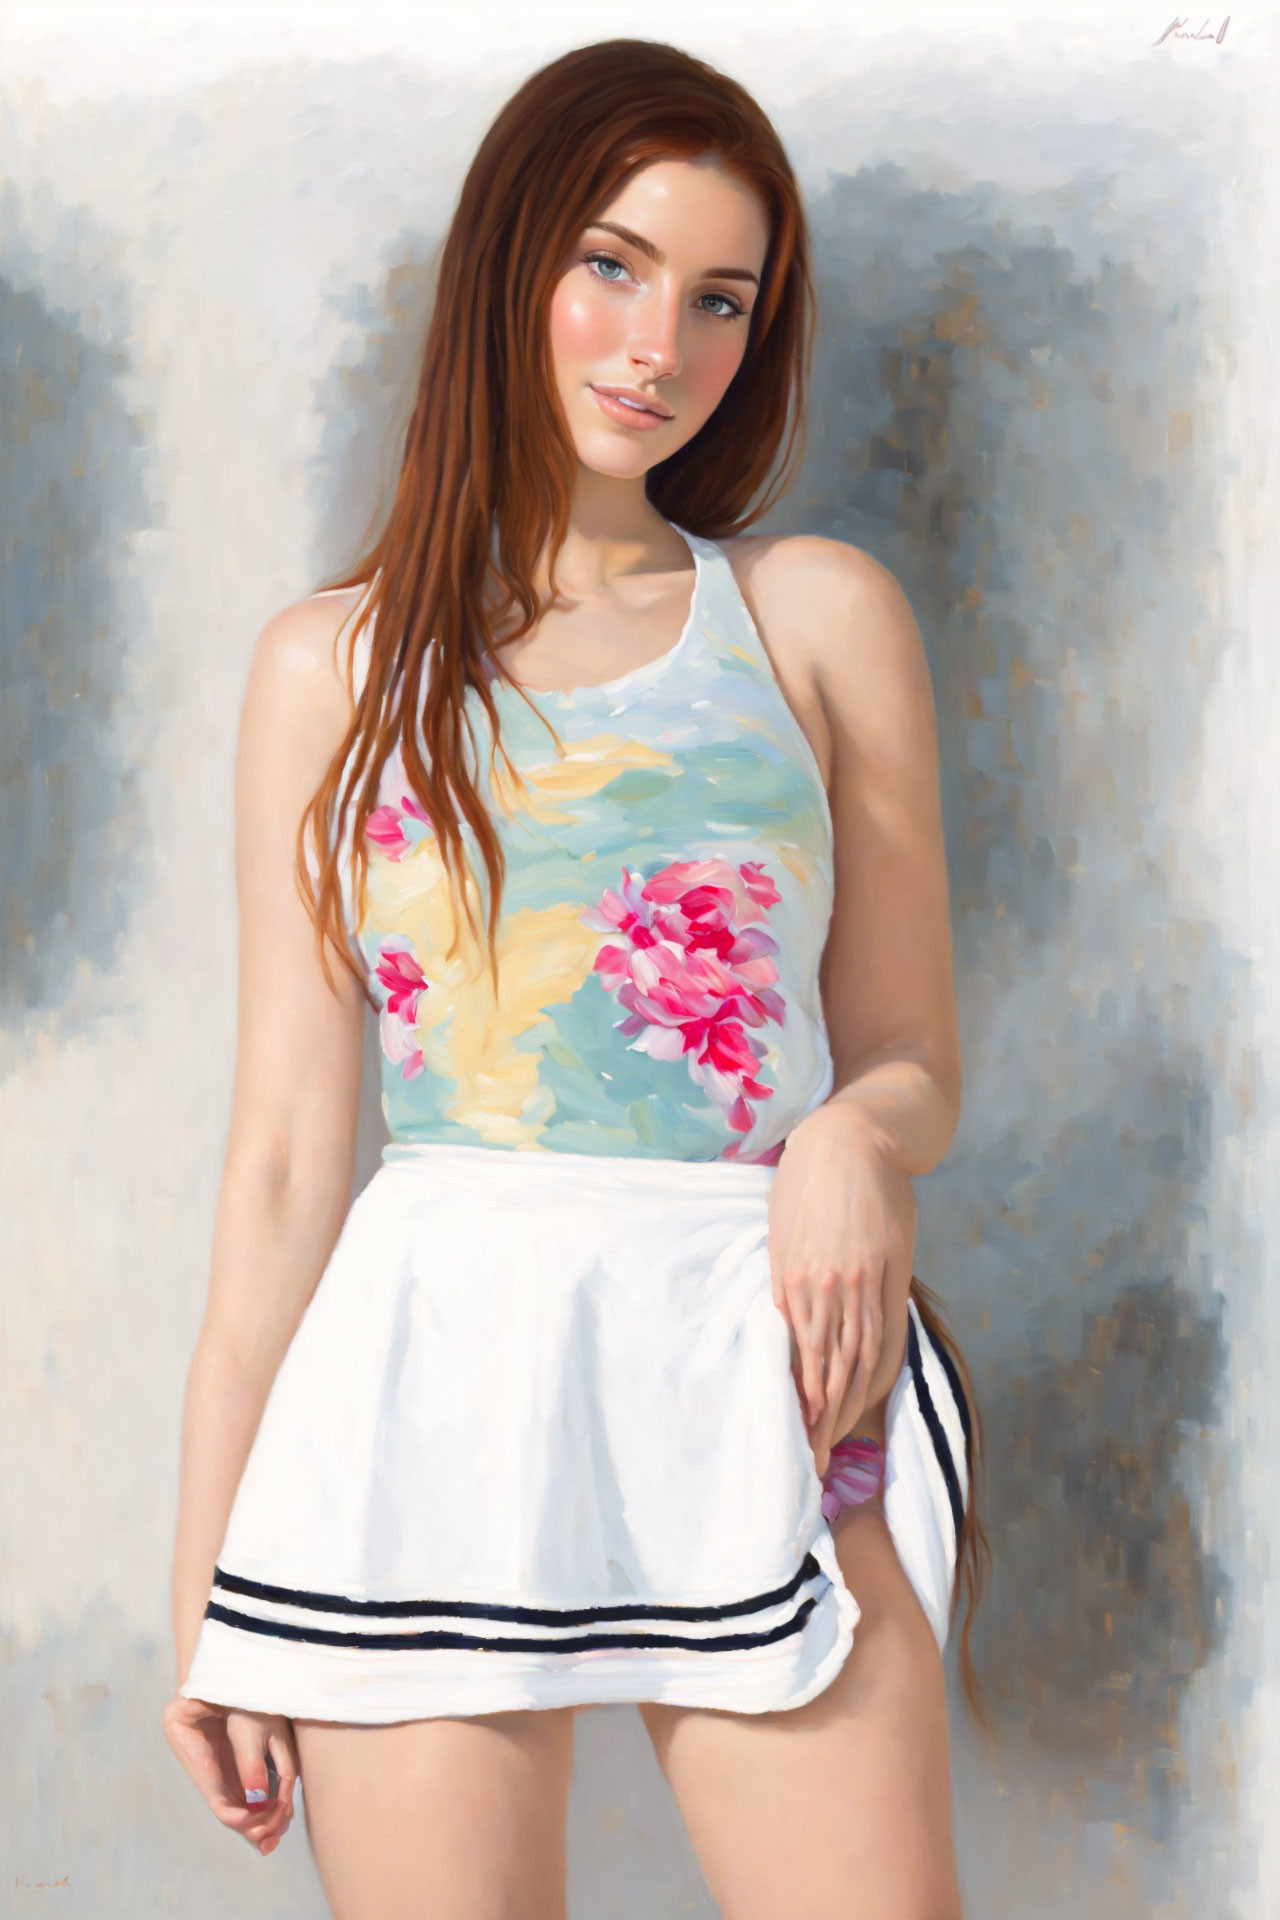 Young woman with red hair in floral tank top and white skirt posing with hand on hip.